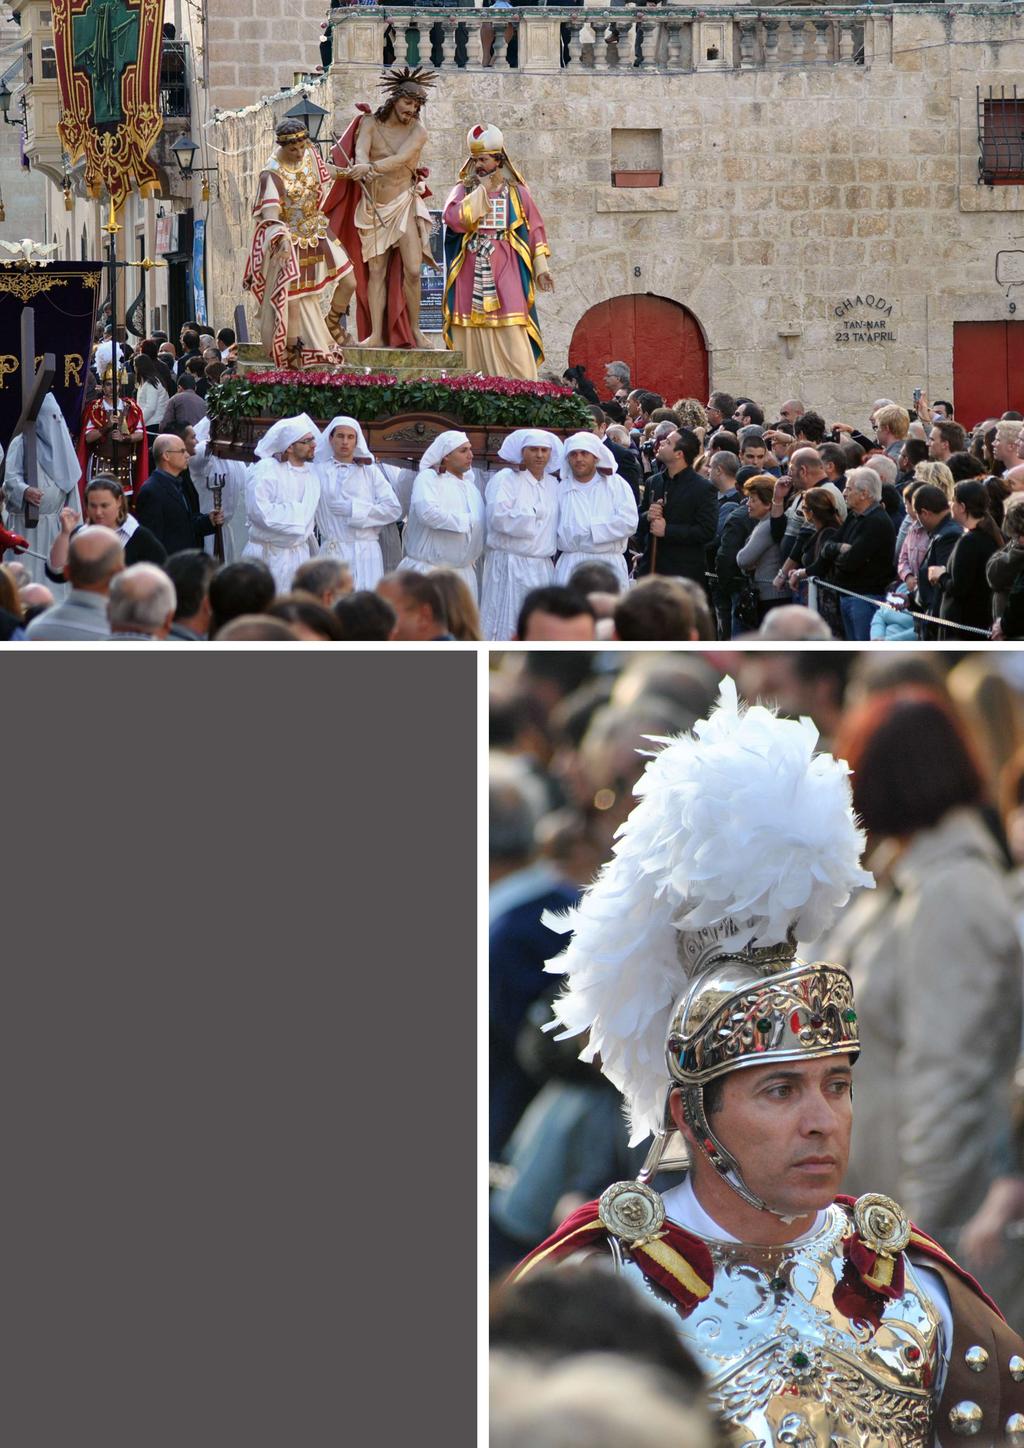 Throughout Lent and Holy Week many different processions take place along the streets of various Maltese towns and villages, as with any religious feast on the island.